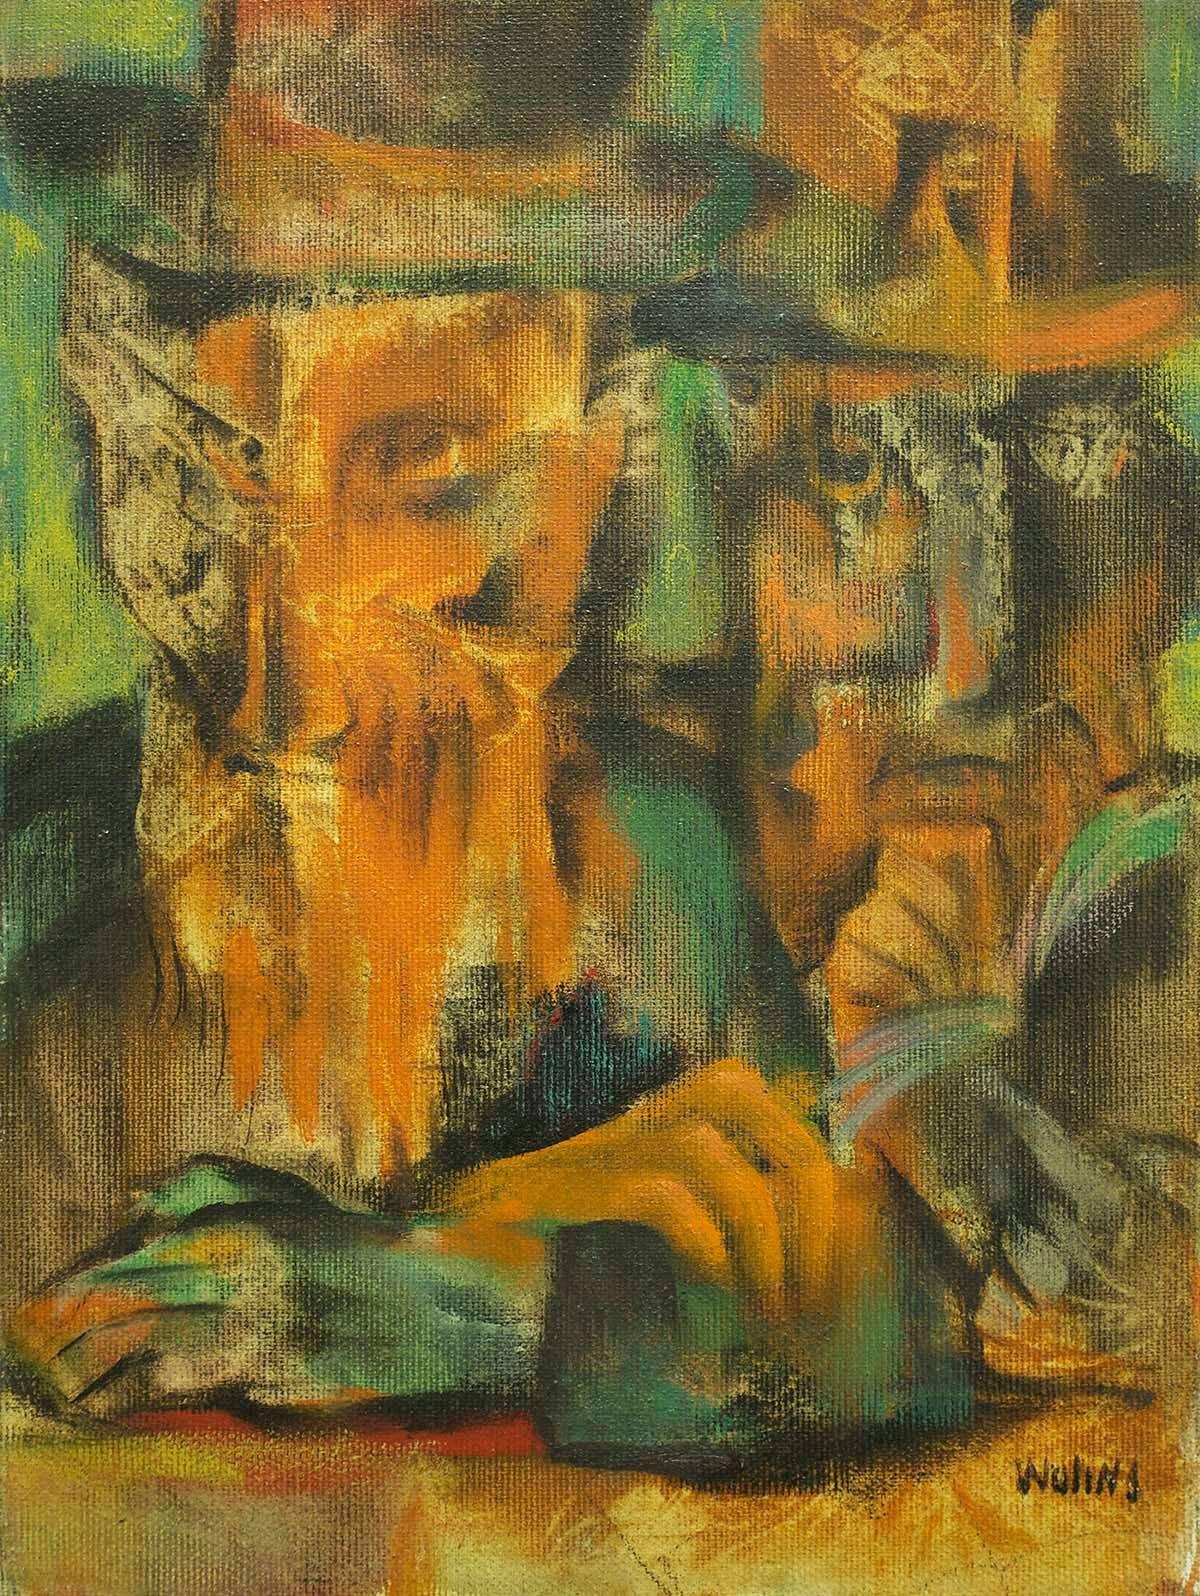 Joseph Wolins Figurative Painting - The Kabbalists, Hassidic Rabbis Judaica Colorful Modernist Painting